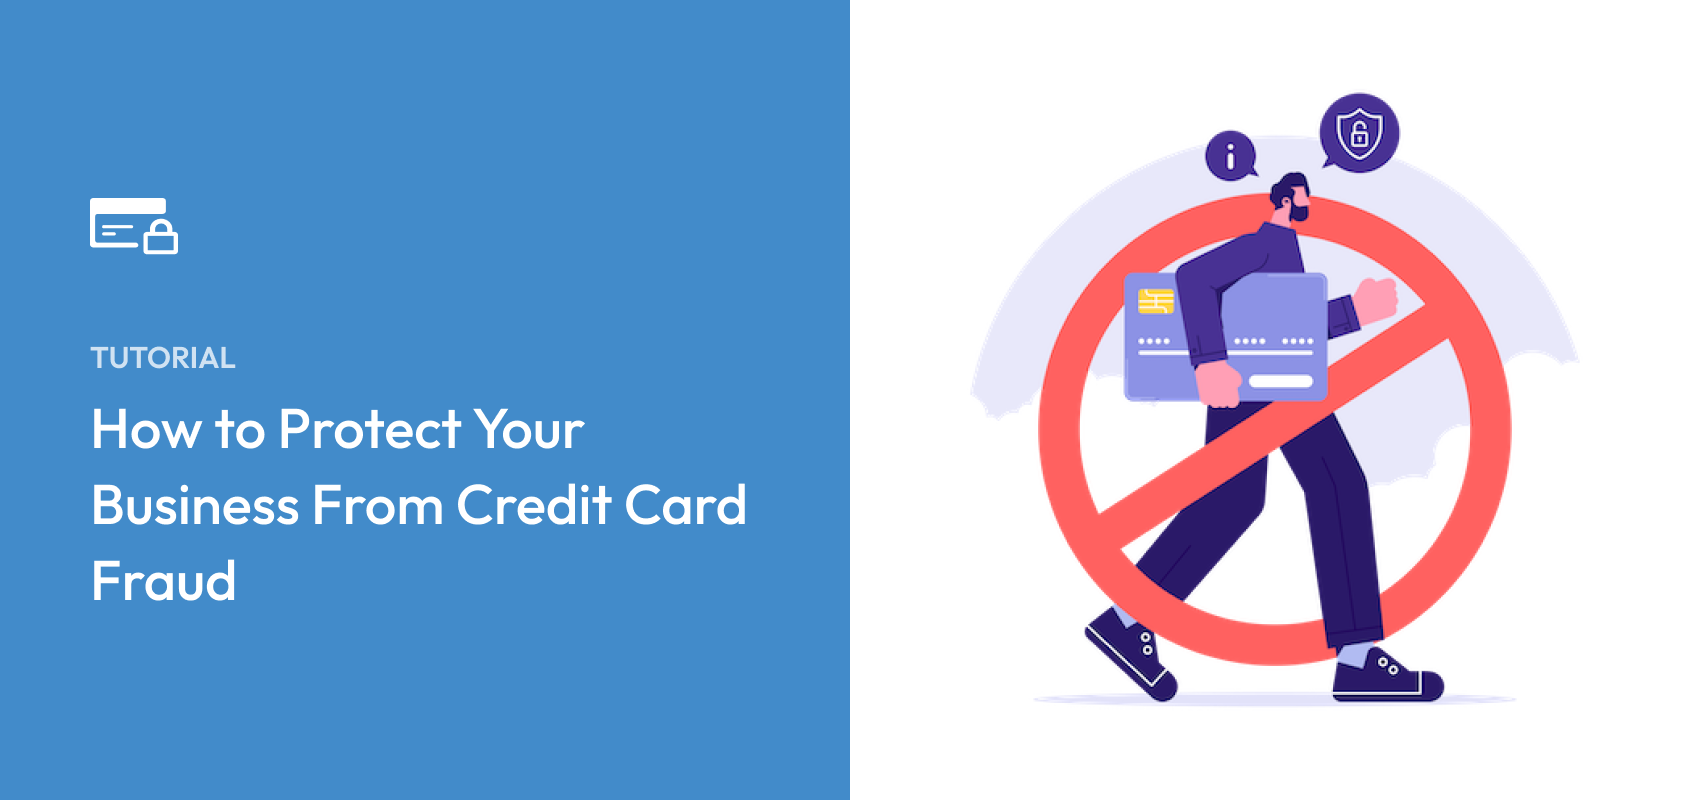 How to Protect Your Business From Credit Card Fraud